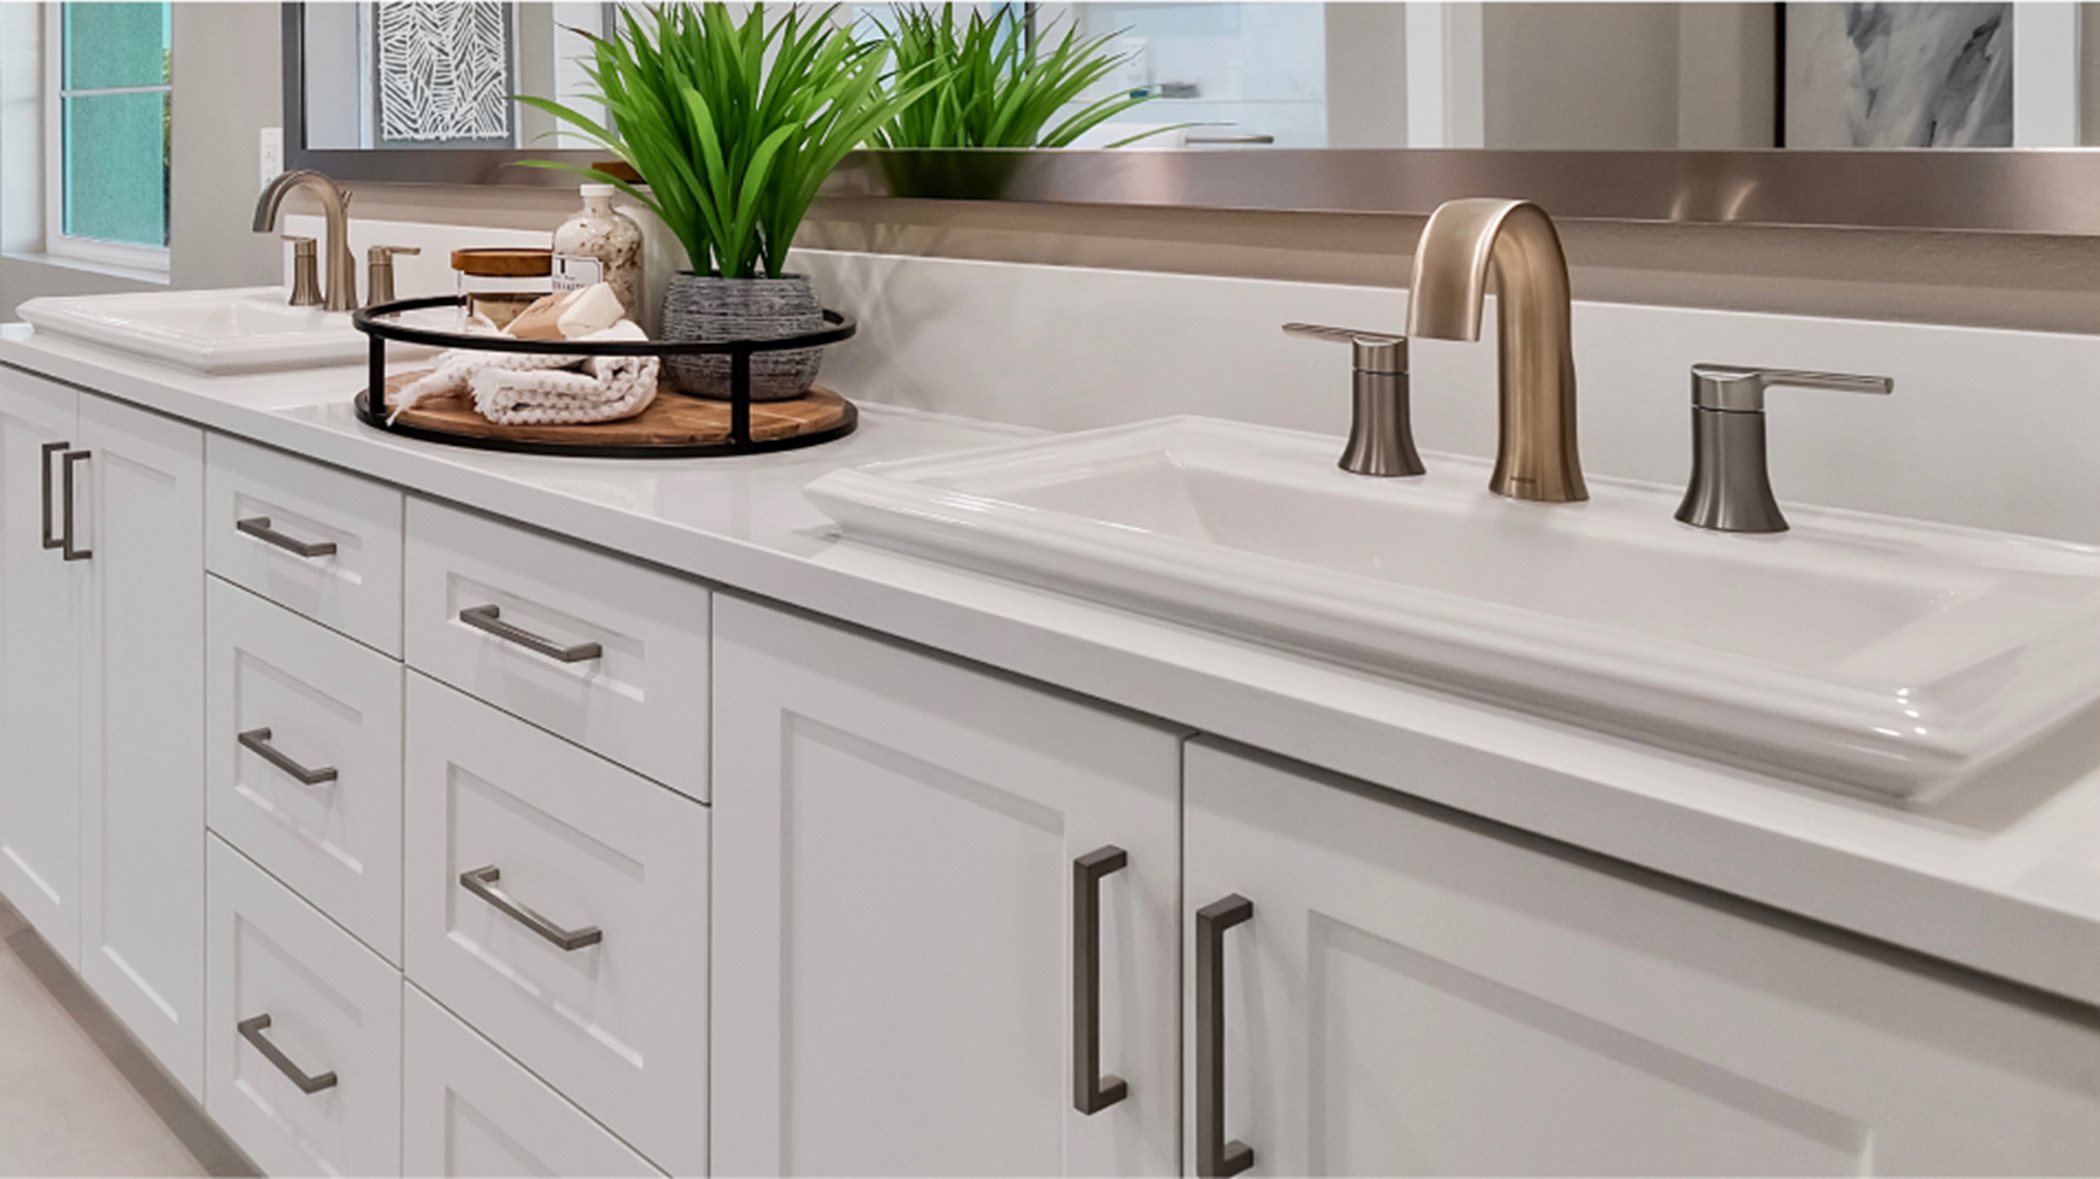 Vanities with Shaker-style cabinetry, Piedrafina™ countertops and 6" backsplashes